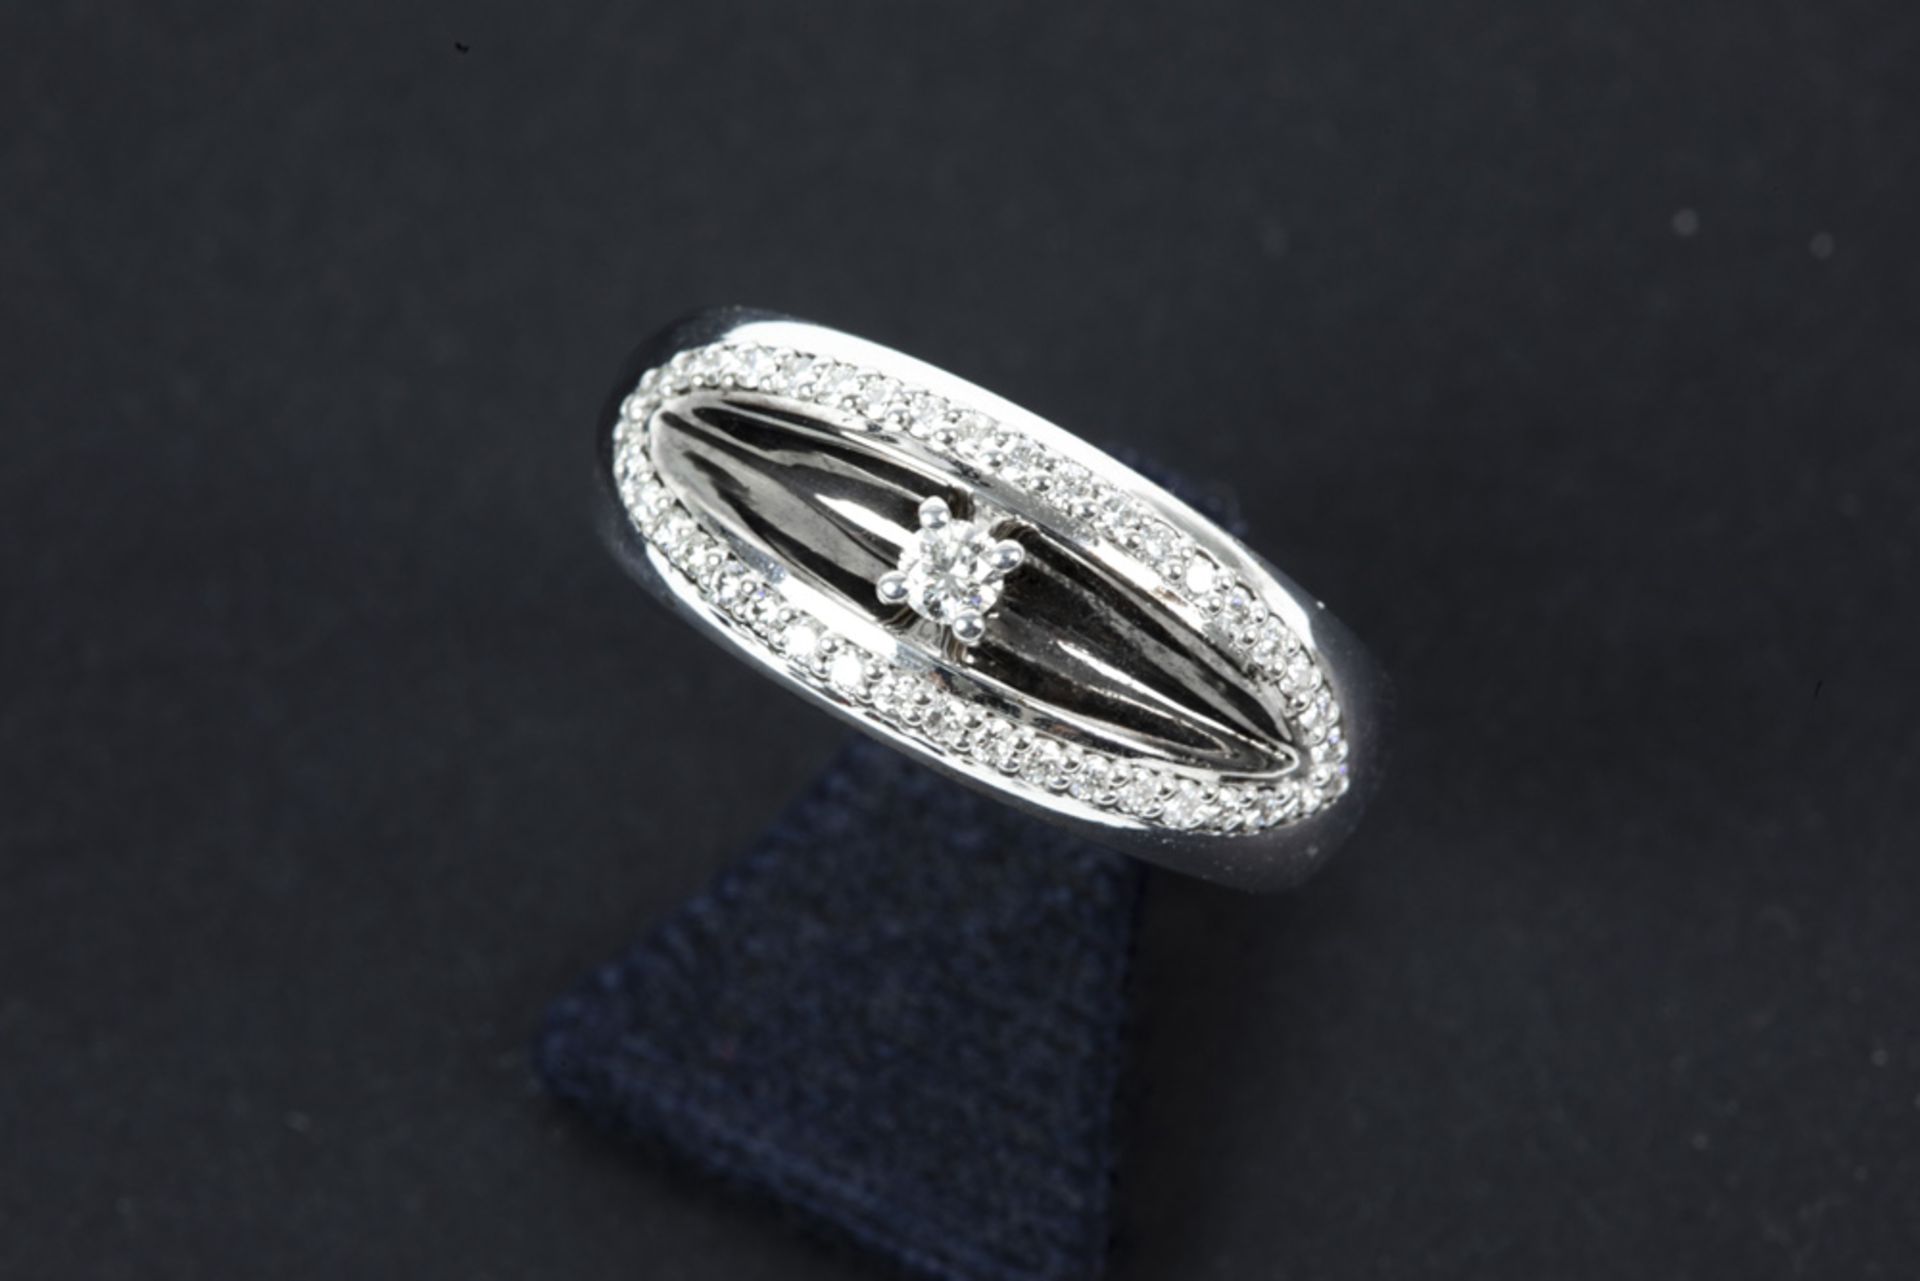 ring in white gold (18 carat) with a central patinated part and ca 0,25 carat high quality brilliant